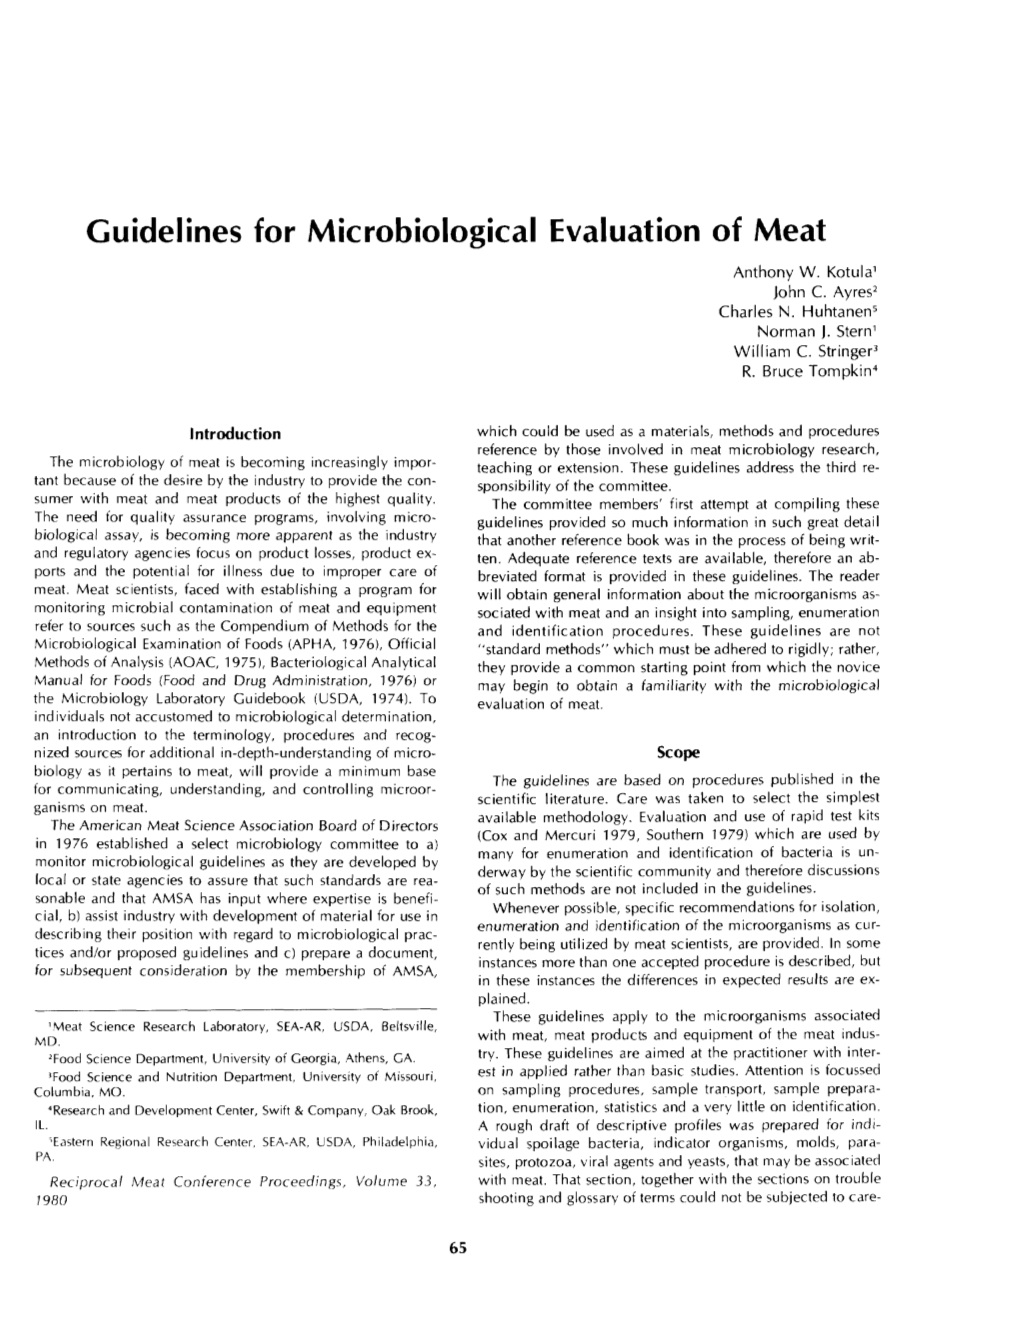 Guidelines for Microbiological Evaluation of Meat Anthony W